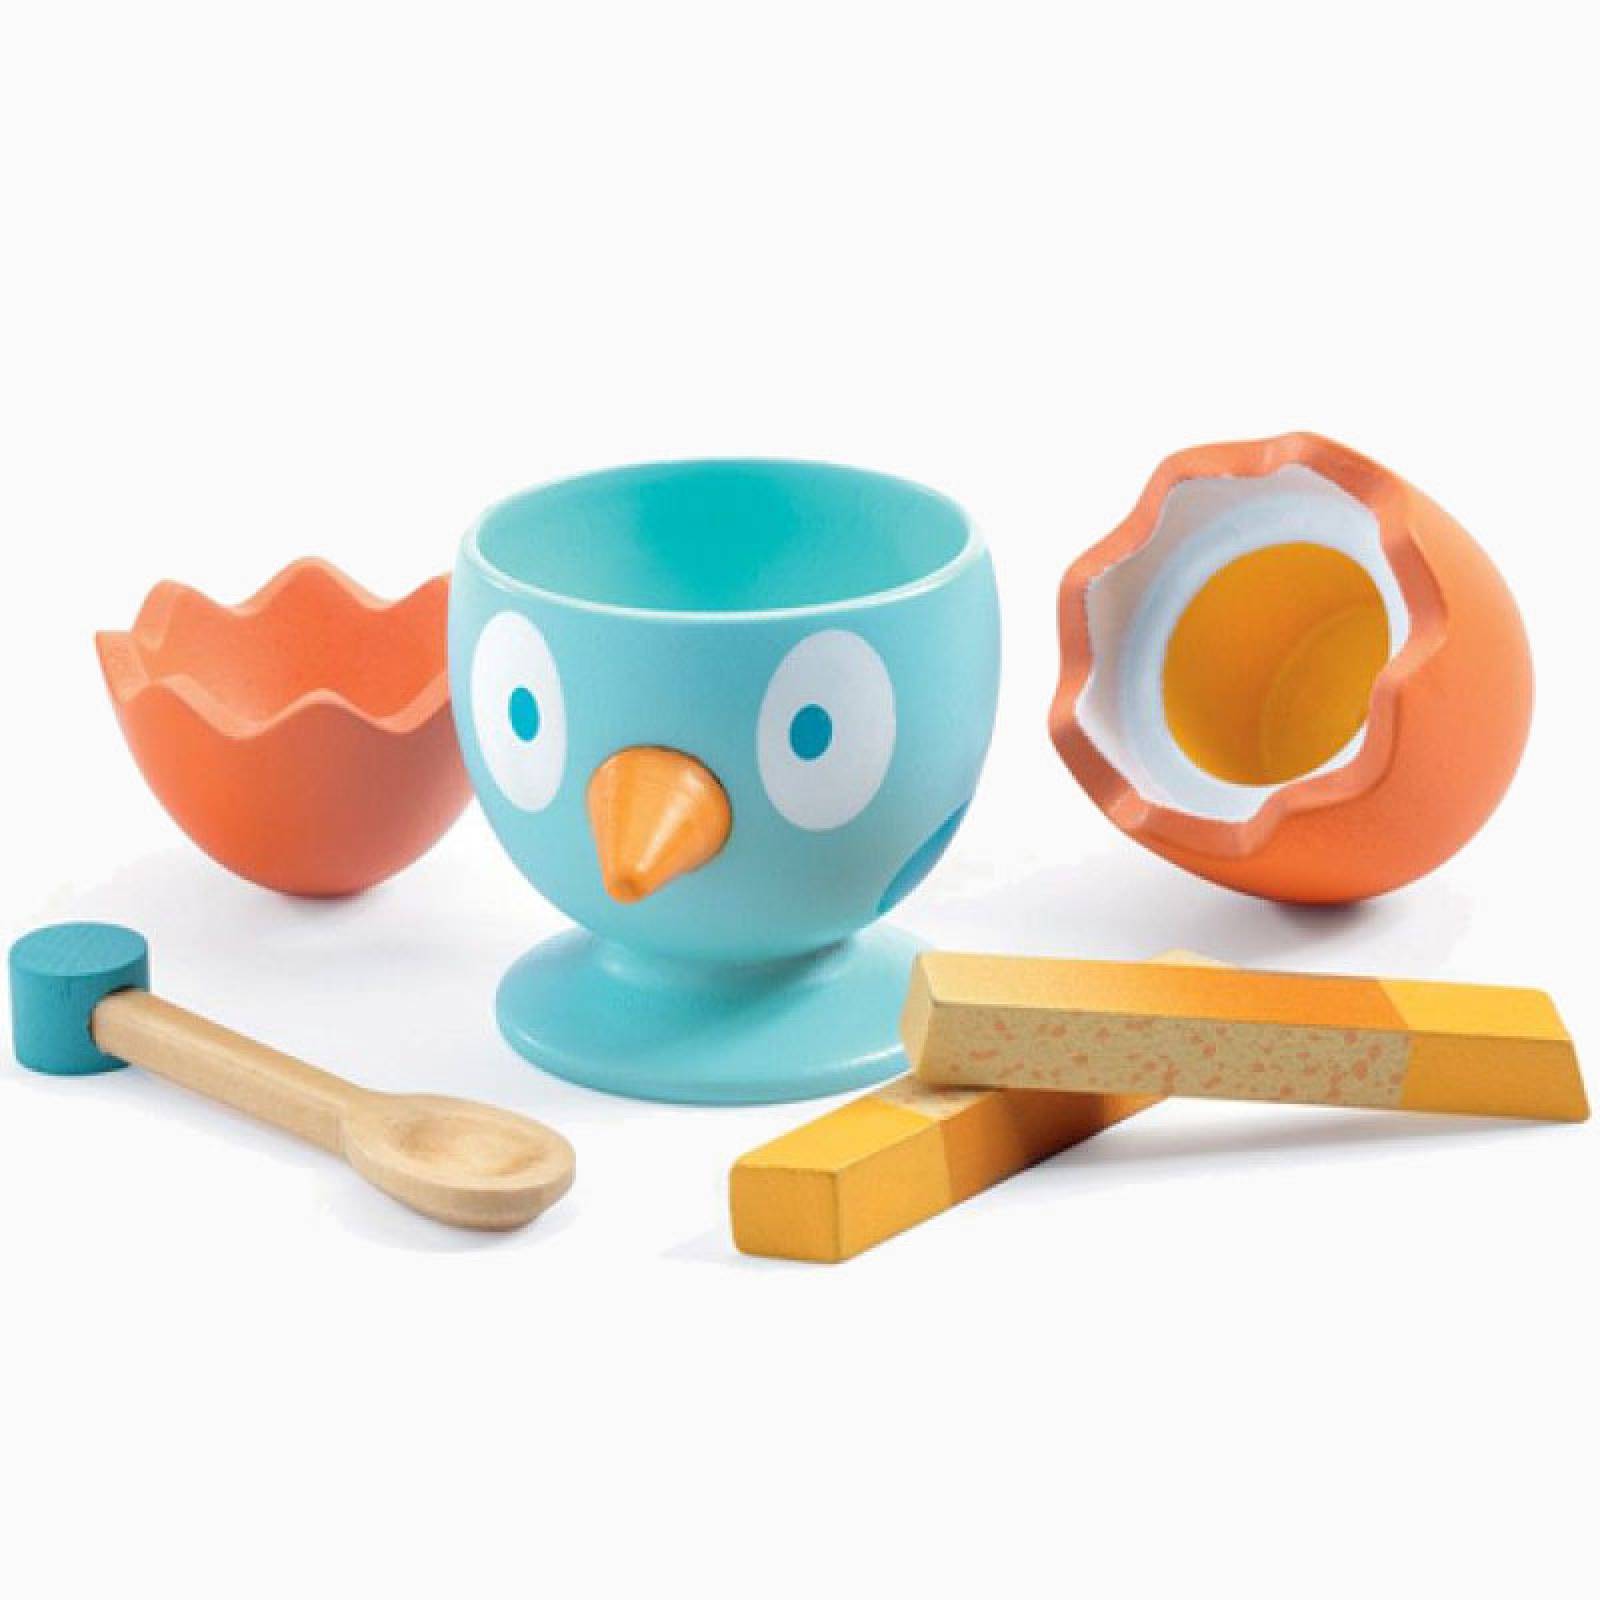 Coco Egg Play Food By Djeco 4+